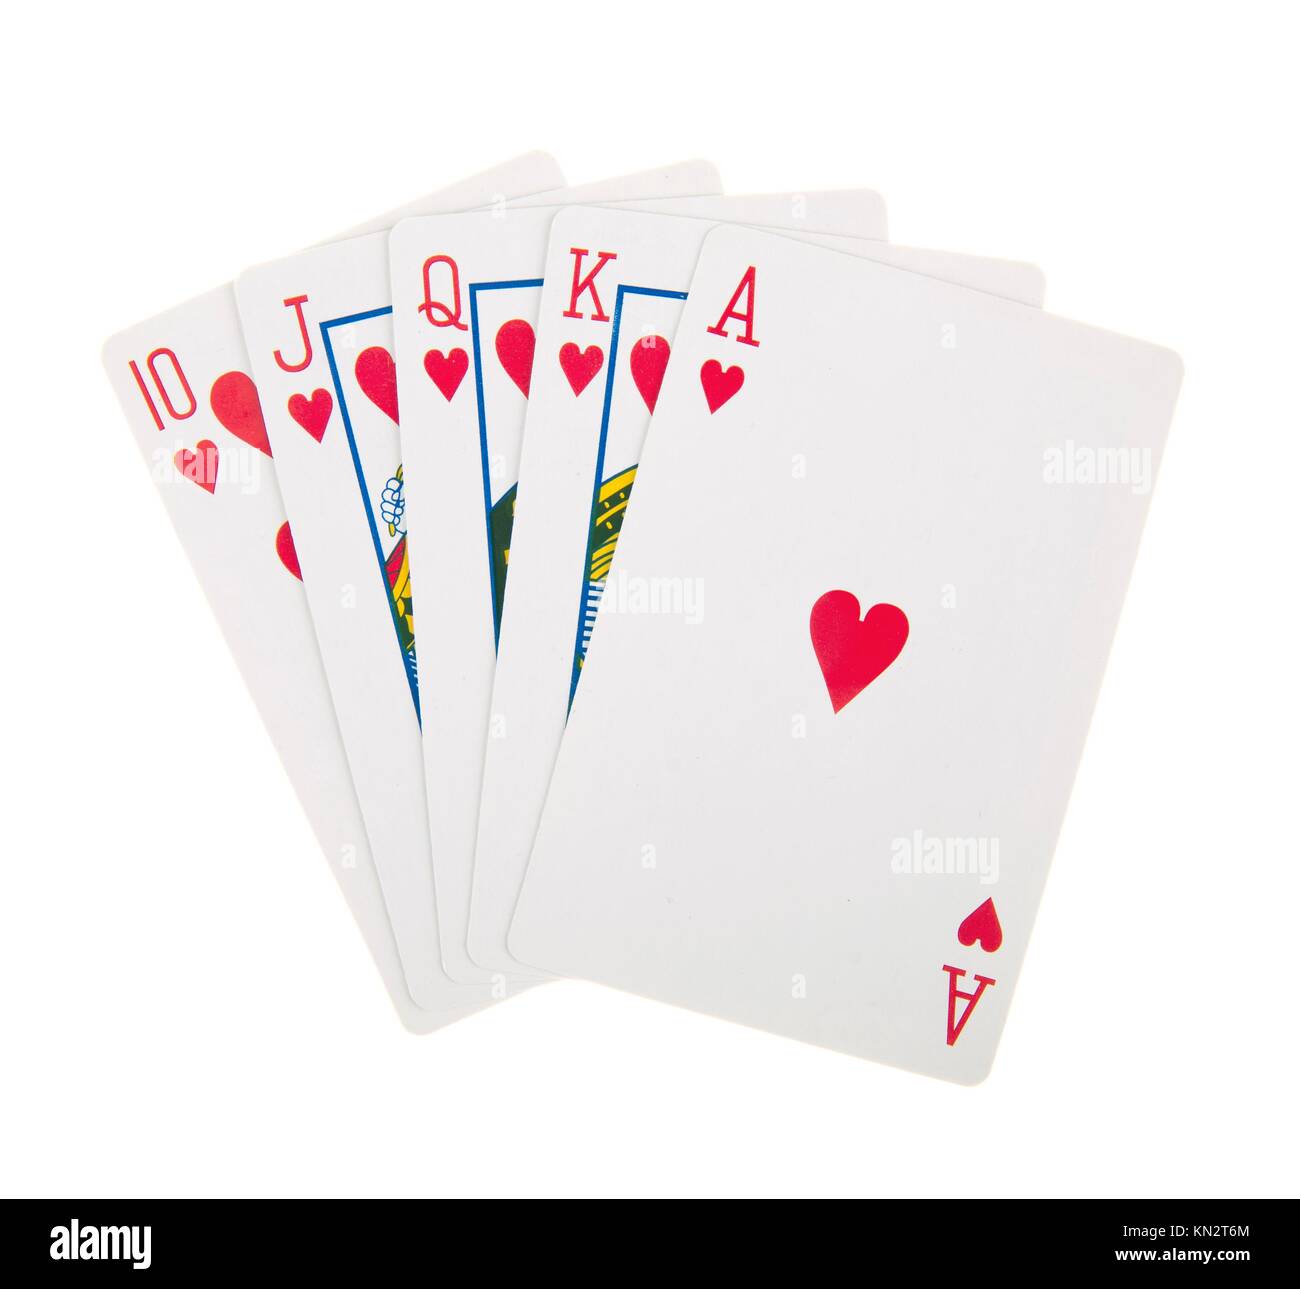 Royal straight flush playing cards poker hand in hearts, isolated on white  background Stock Photo - Alamy